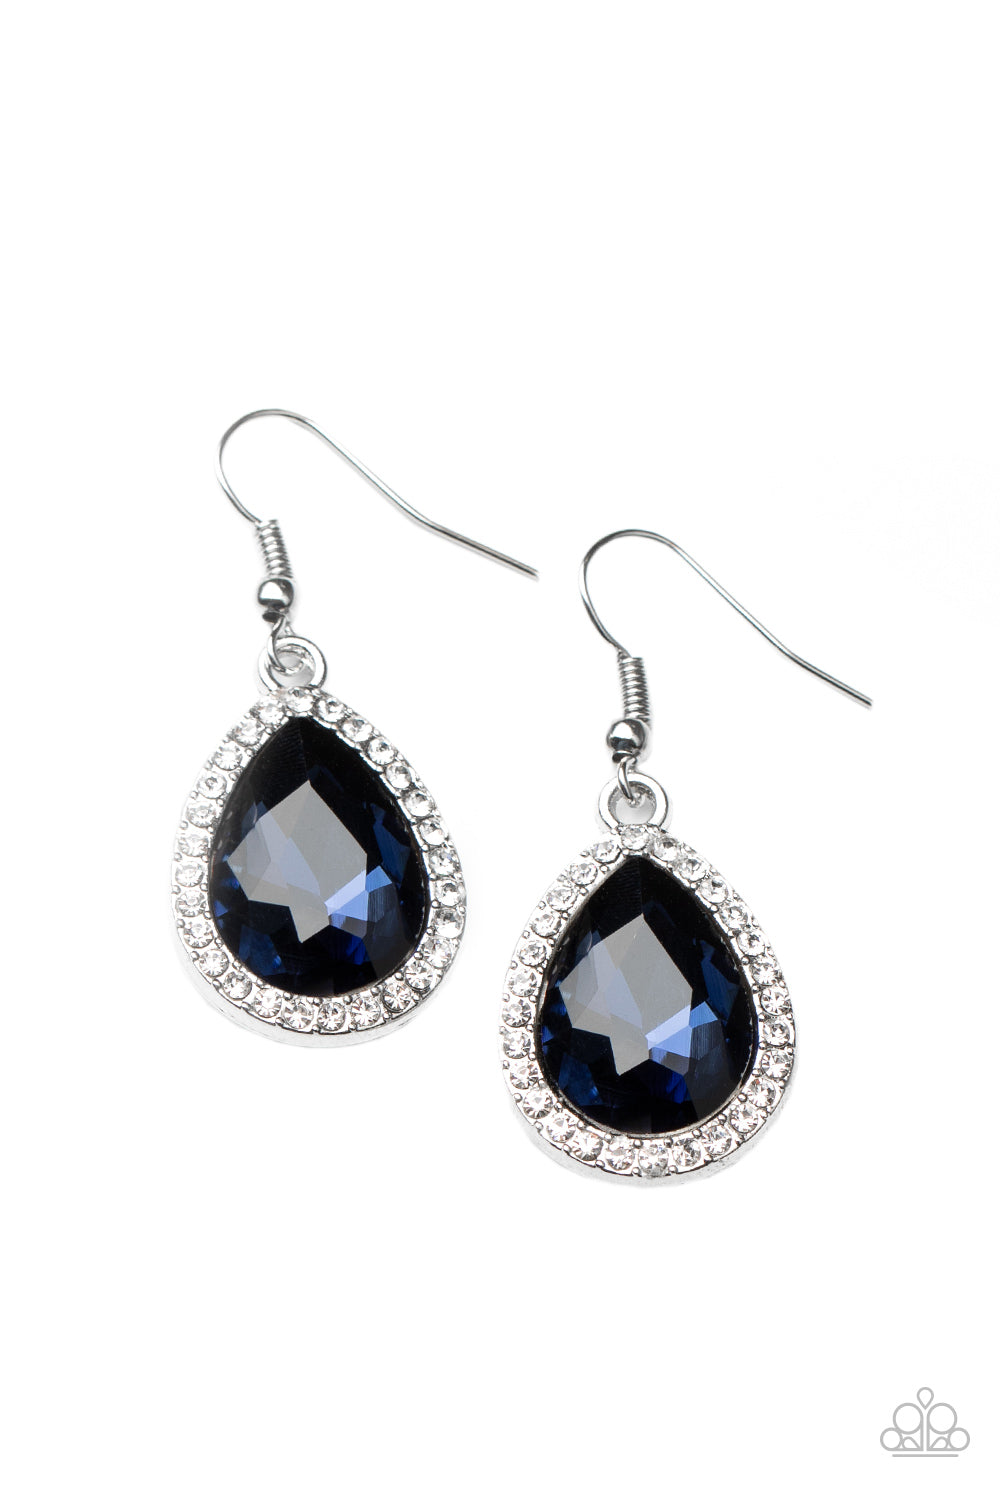 Dripping With Drama - Blue Earrings